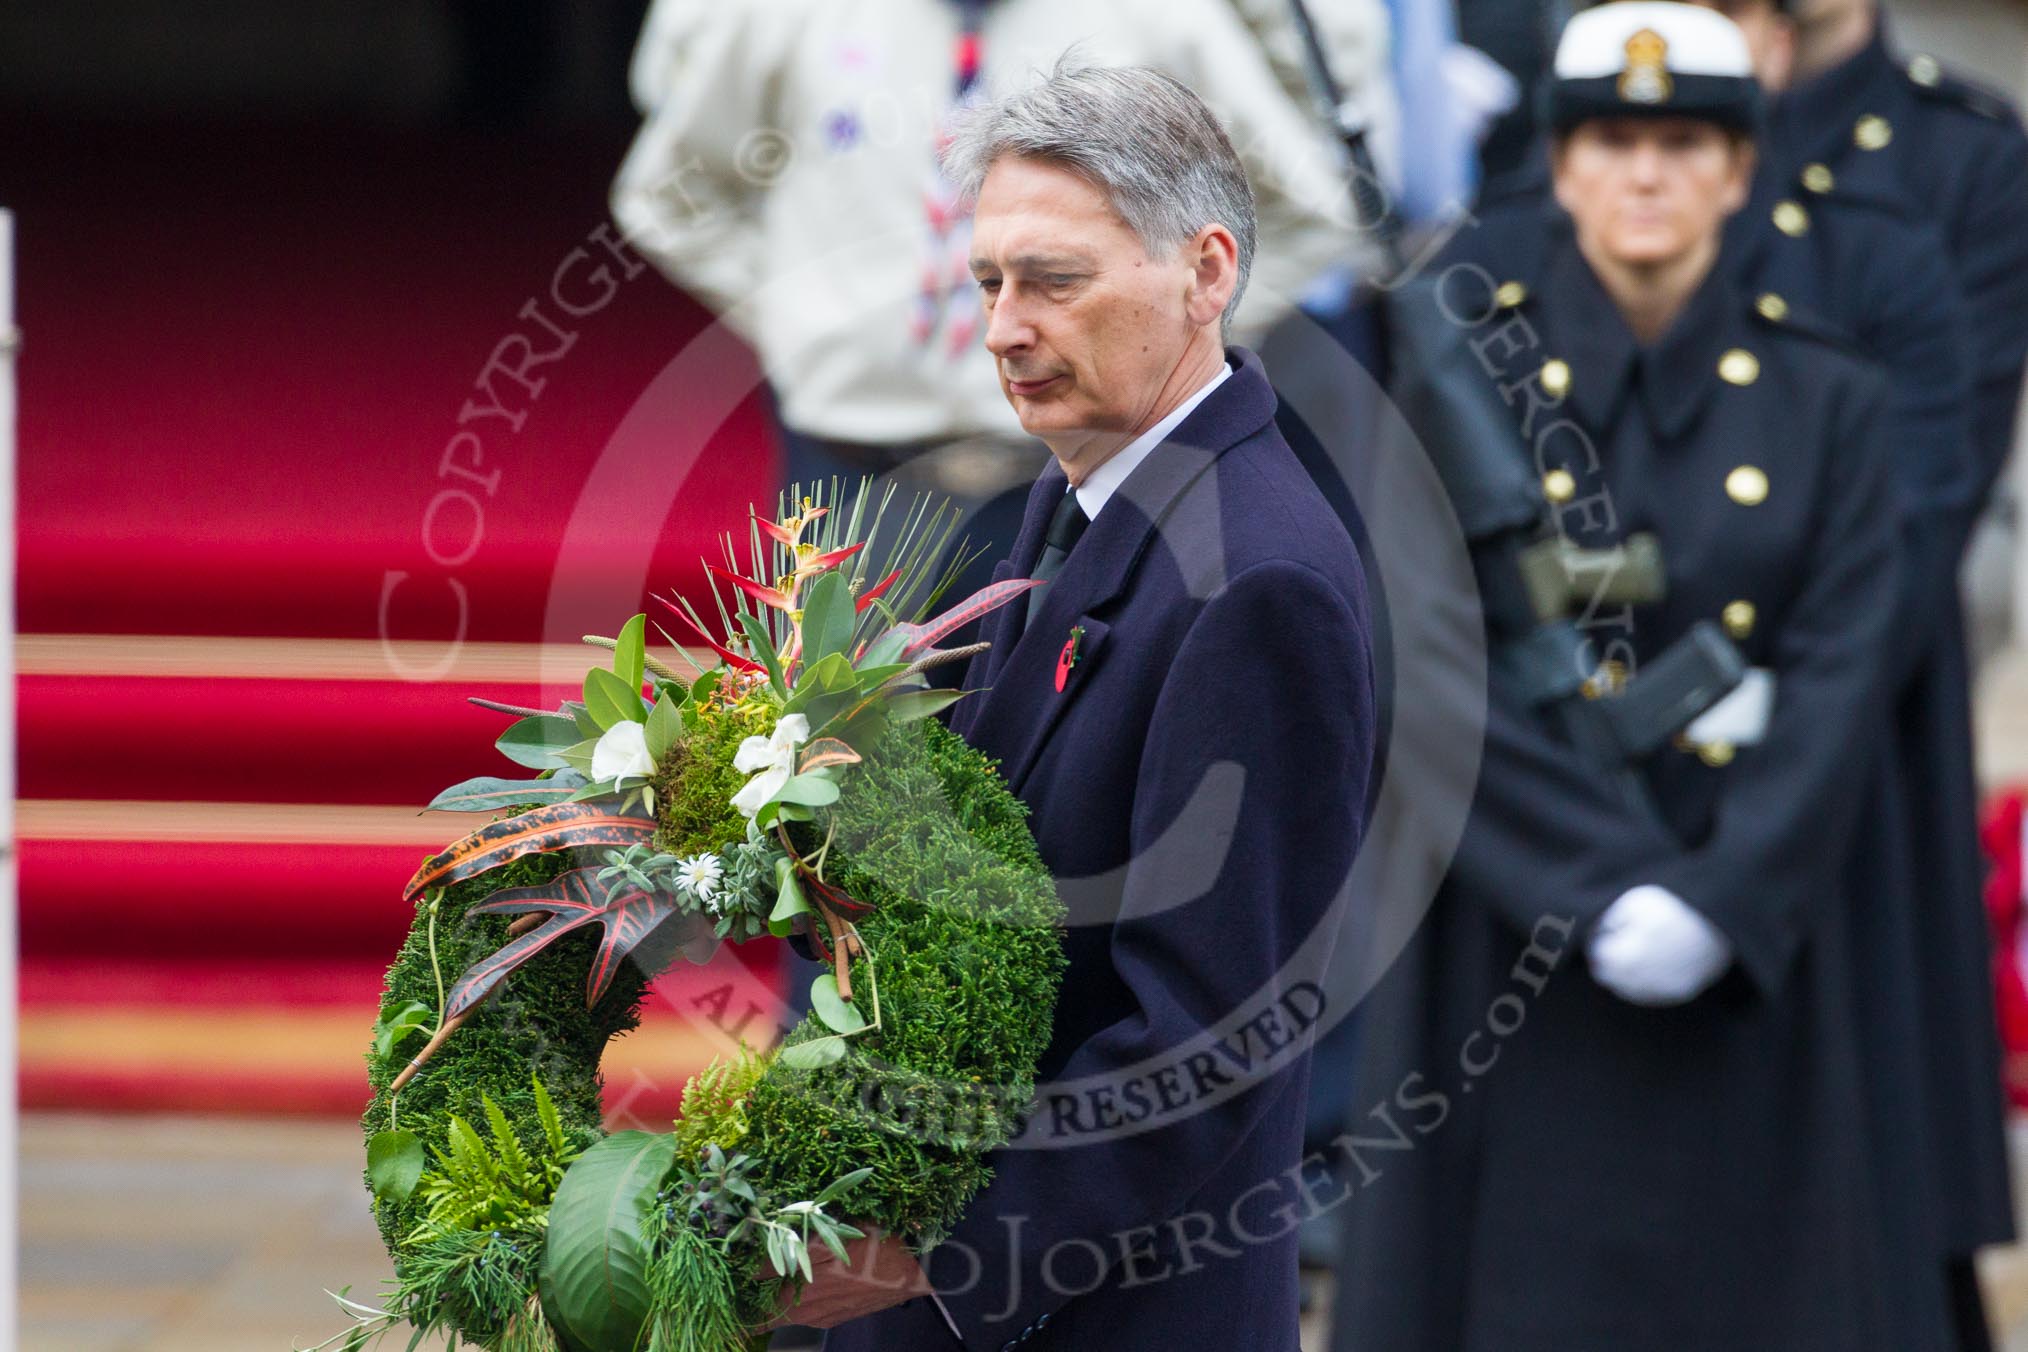 Remembrance Sunday at the Cenotaph in London 2014: Philip Hammond, Secretary of State for Foreign and Commonwealth Affairs, on the way to the Cenotaph to lay his wreath.
Press stand opposite the Foreign Office building, Whitehall, London SW1,
London,
Greater London,
United Kingdom,
on 09 November 2014 at 11:09, image #235